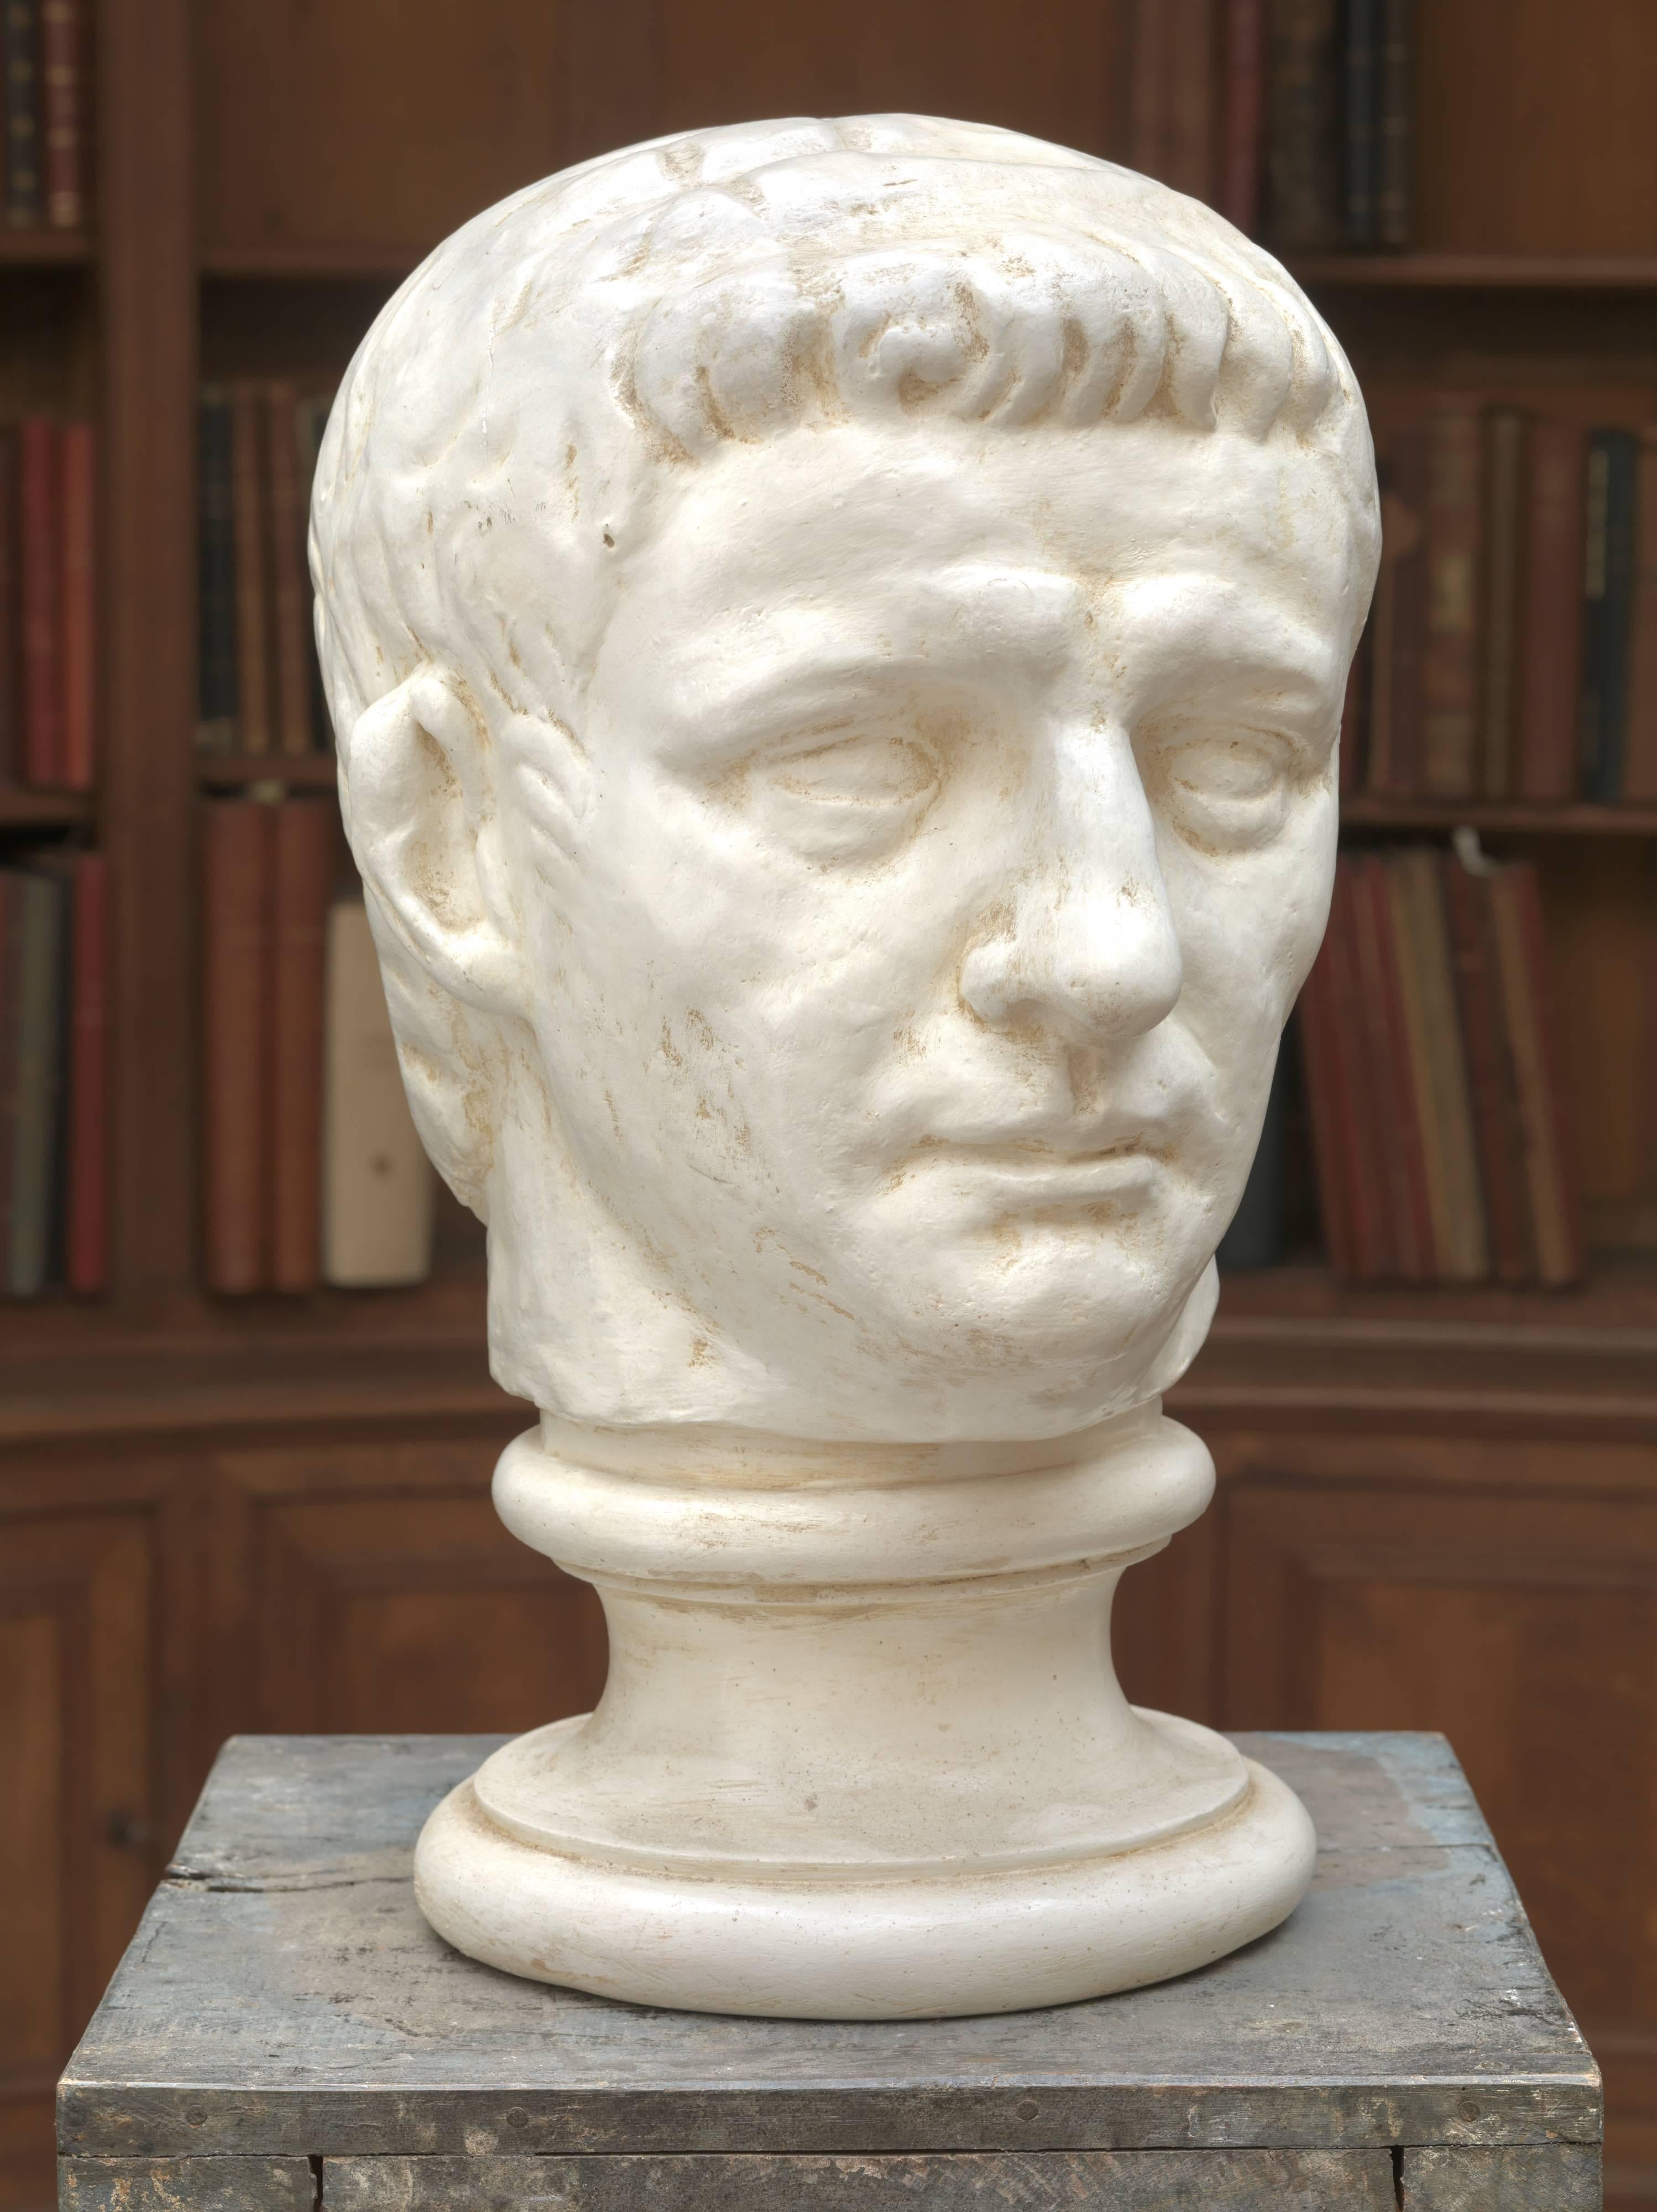 Plaster model of Roman head on classic base, 20th century.
The figure is not signed.